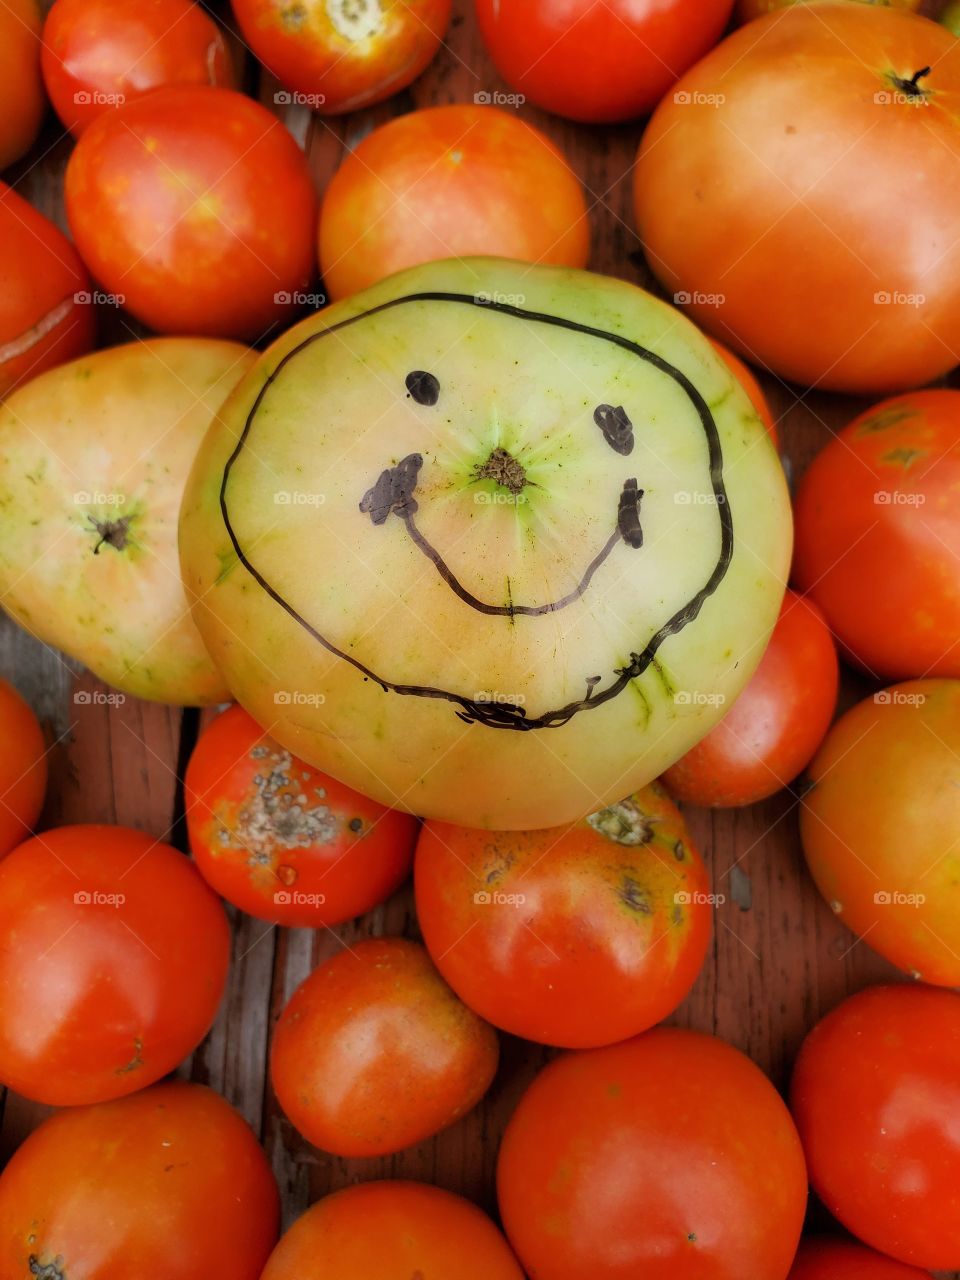 tomato with a smiley face